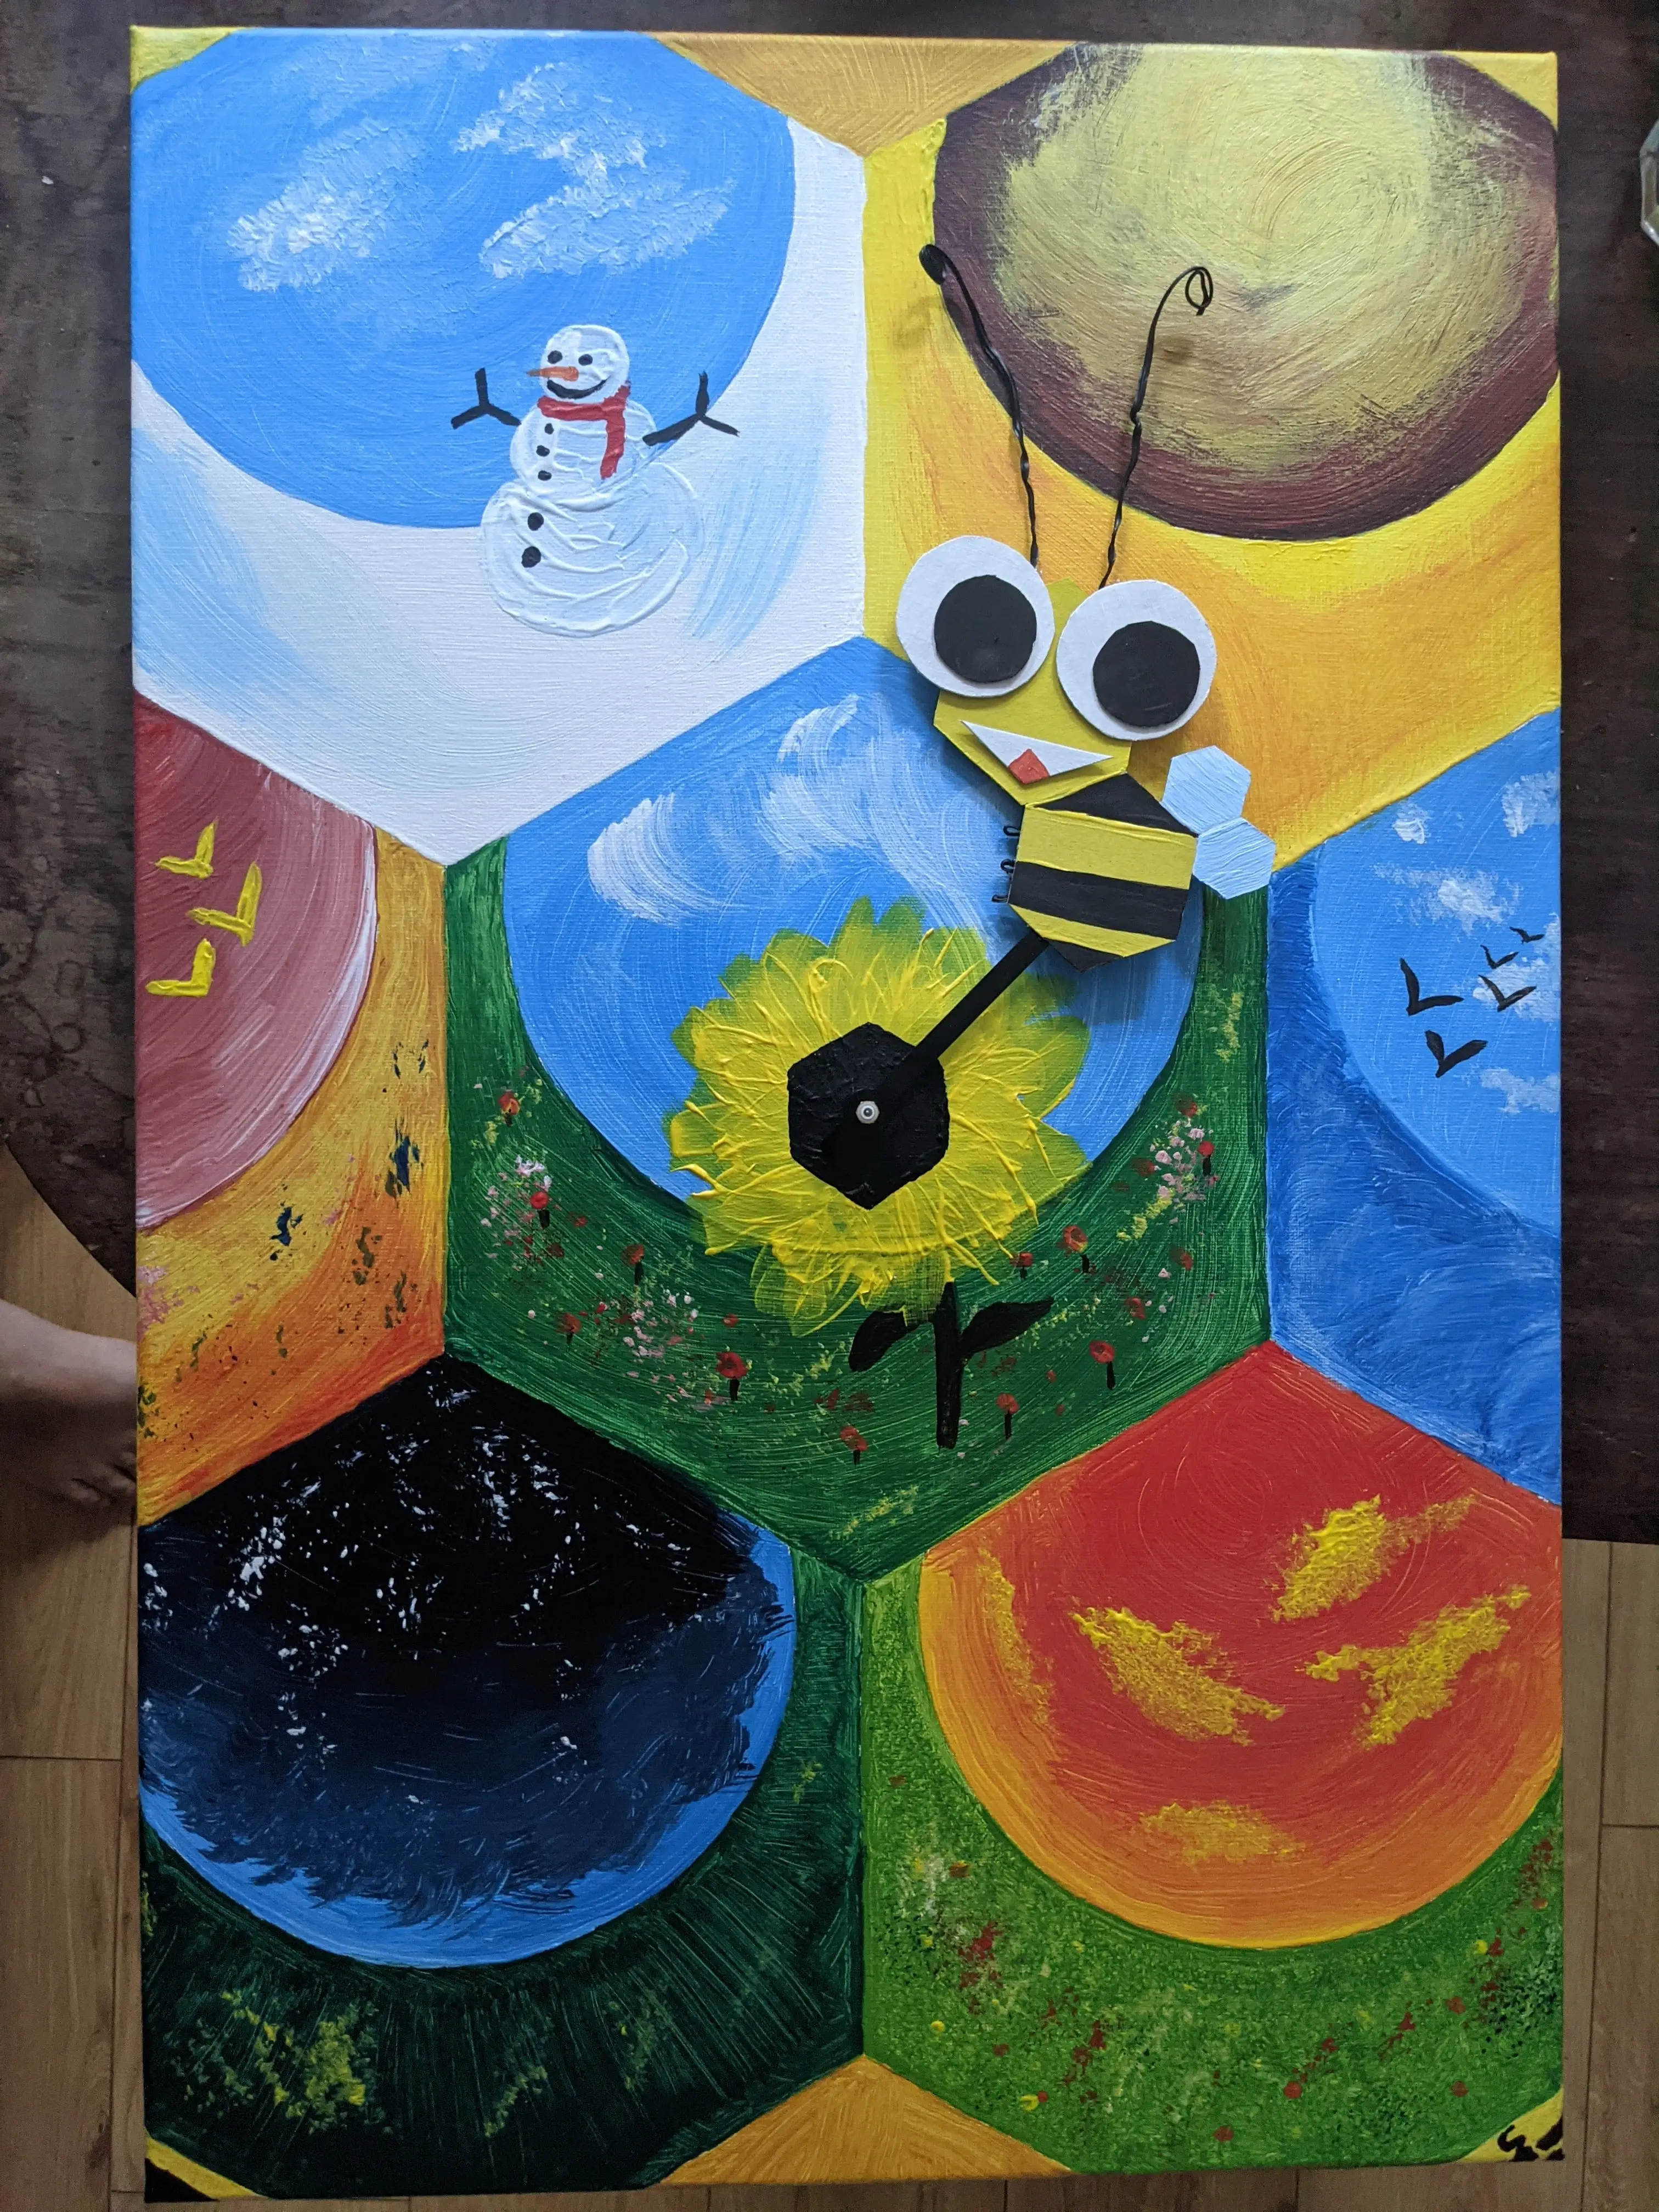 The finished painting with the bee attached to the clock hand